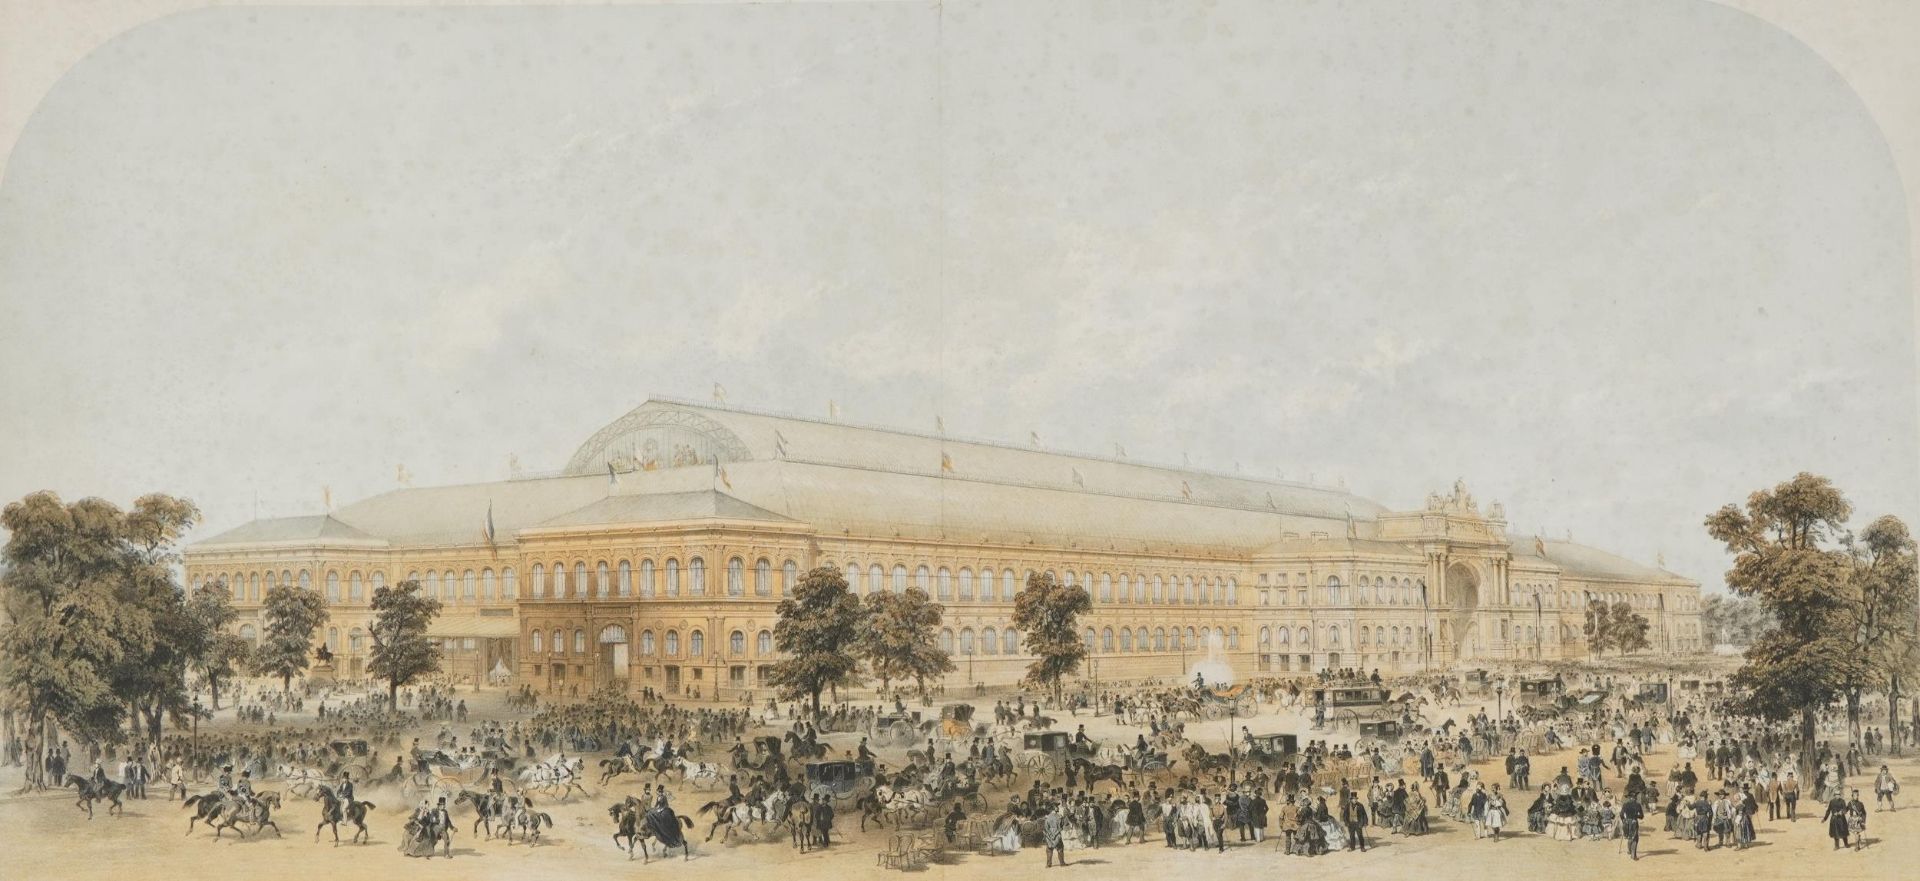 The Palace of Industry, Paris Universal Exhibition of 1855, 19th century lithograph in colour,